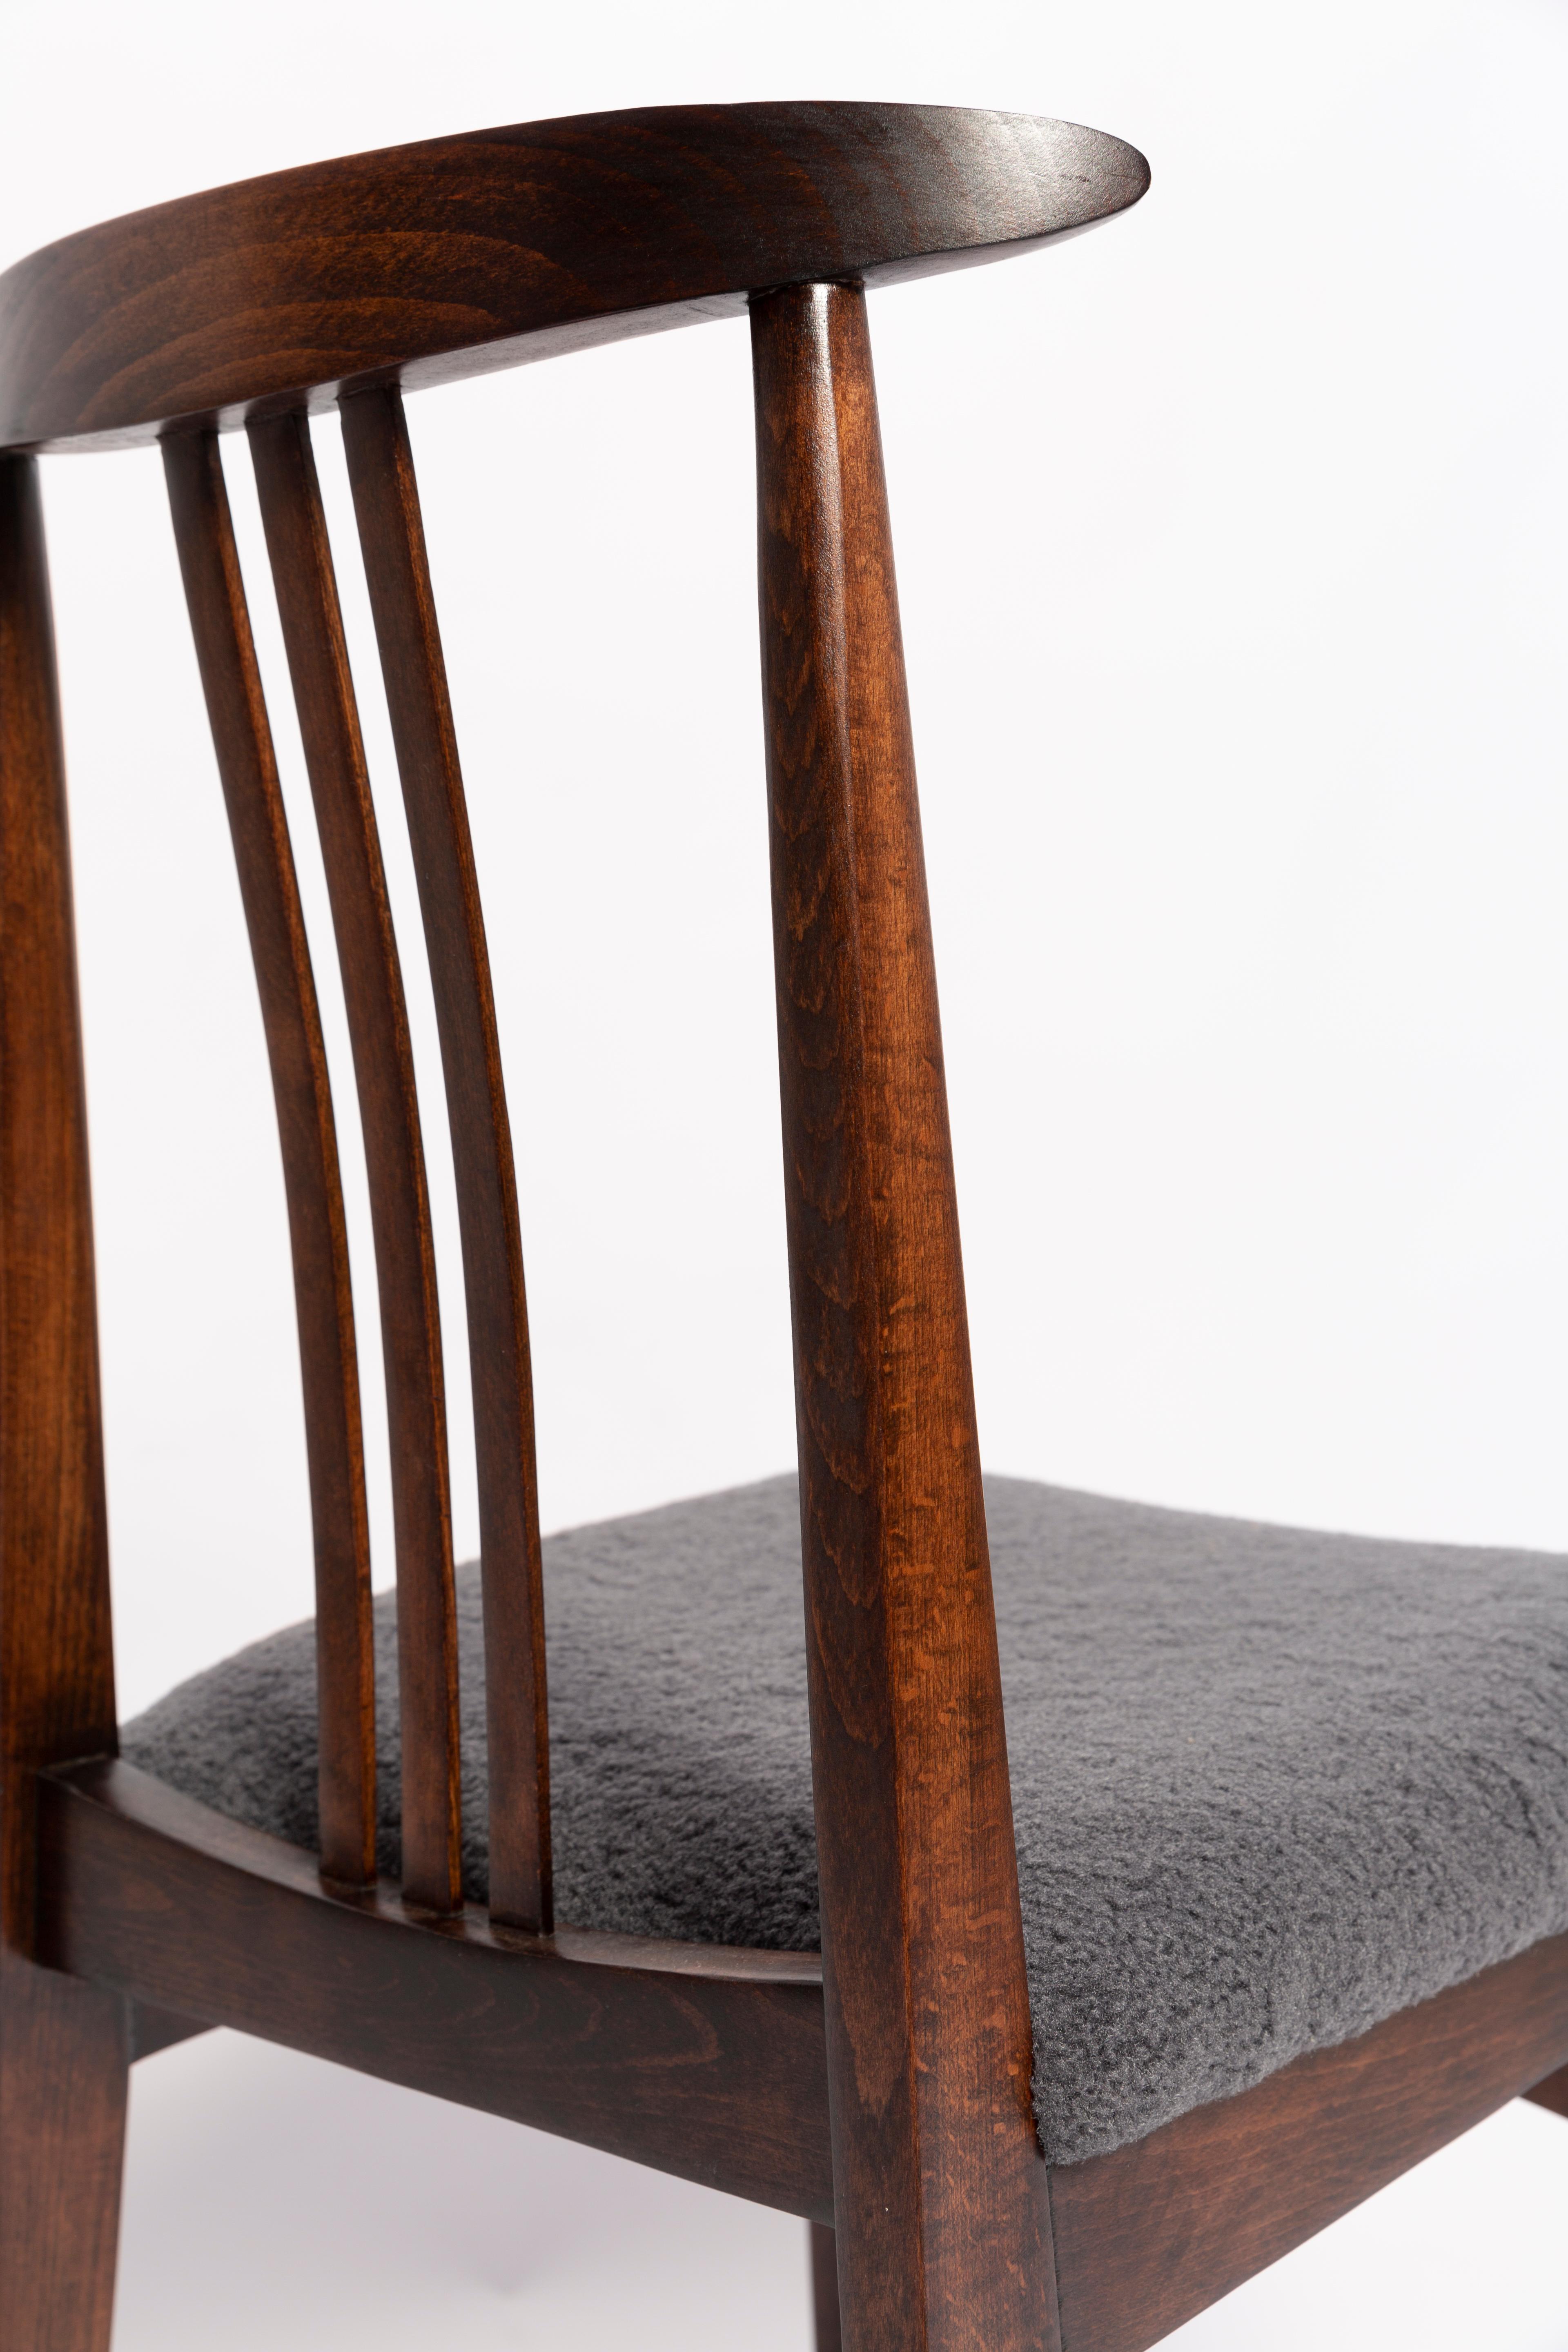 Hand-Crafted Twelve Mid-Century Graphite Boucle Chairs, Walnut Wood, M Zielinski, Europe 1960 For Sale